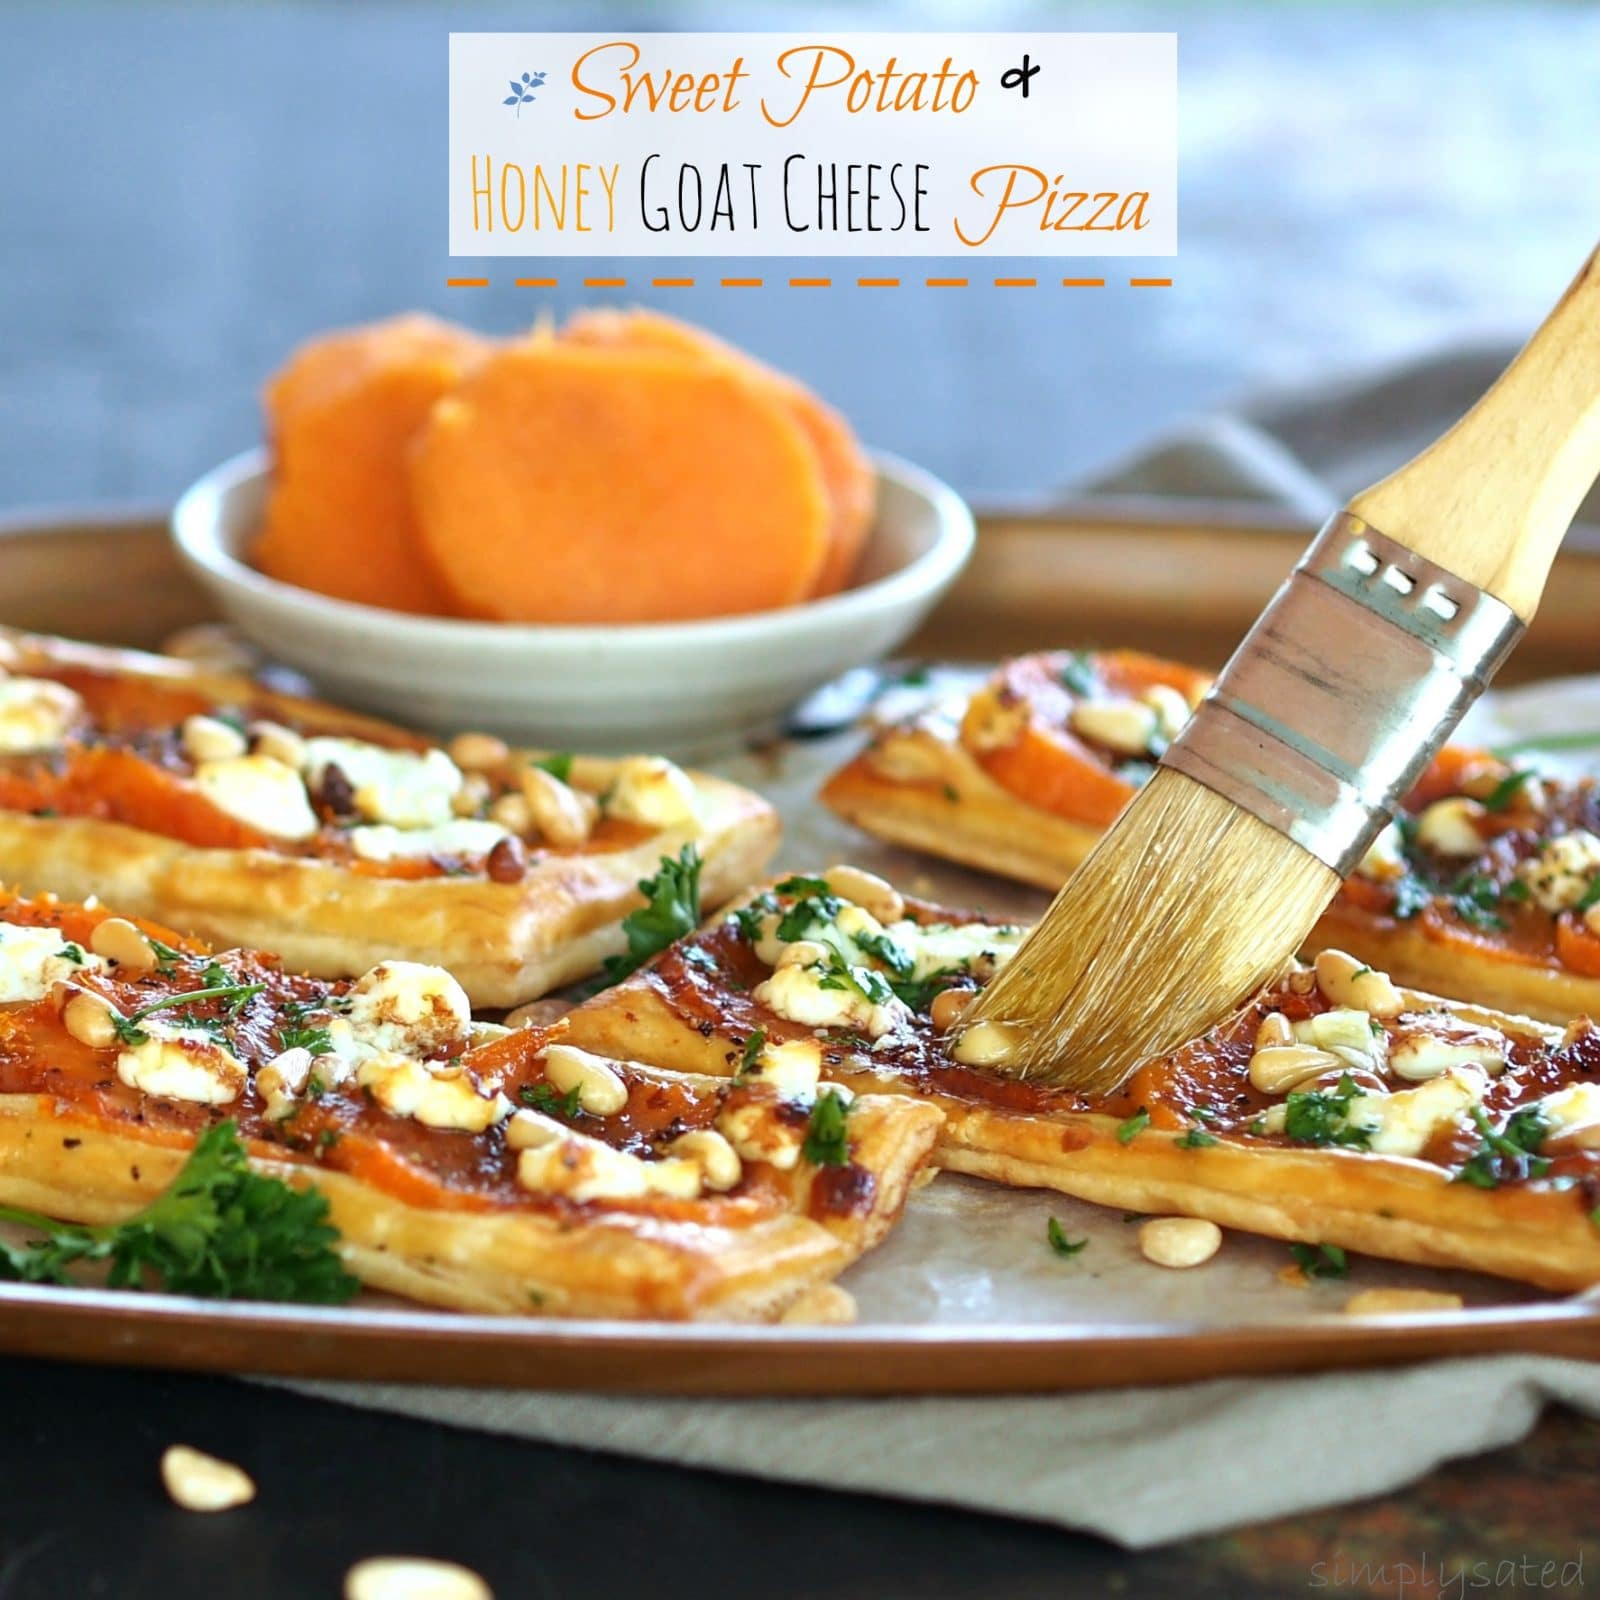 Sweet Potato & Honey Goat Cheese Pizza is just as delicious made with freshly baked sweet potatoes or even leftover sweet potatoes from Thanksgiving.